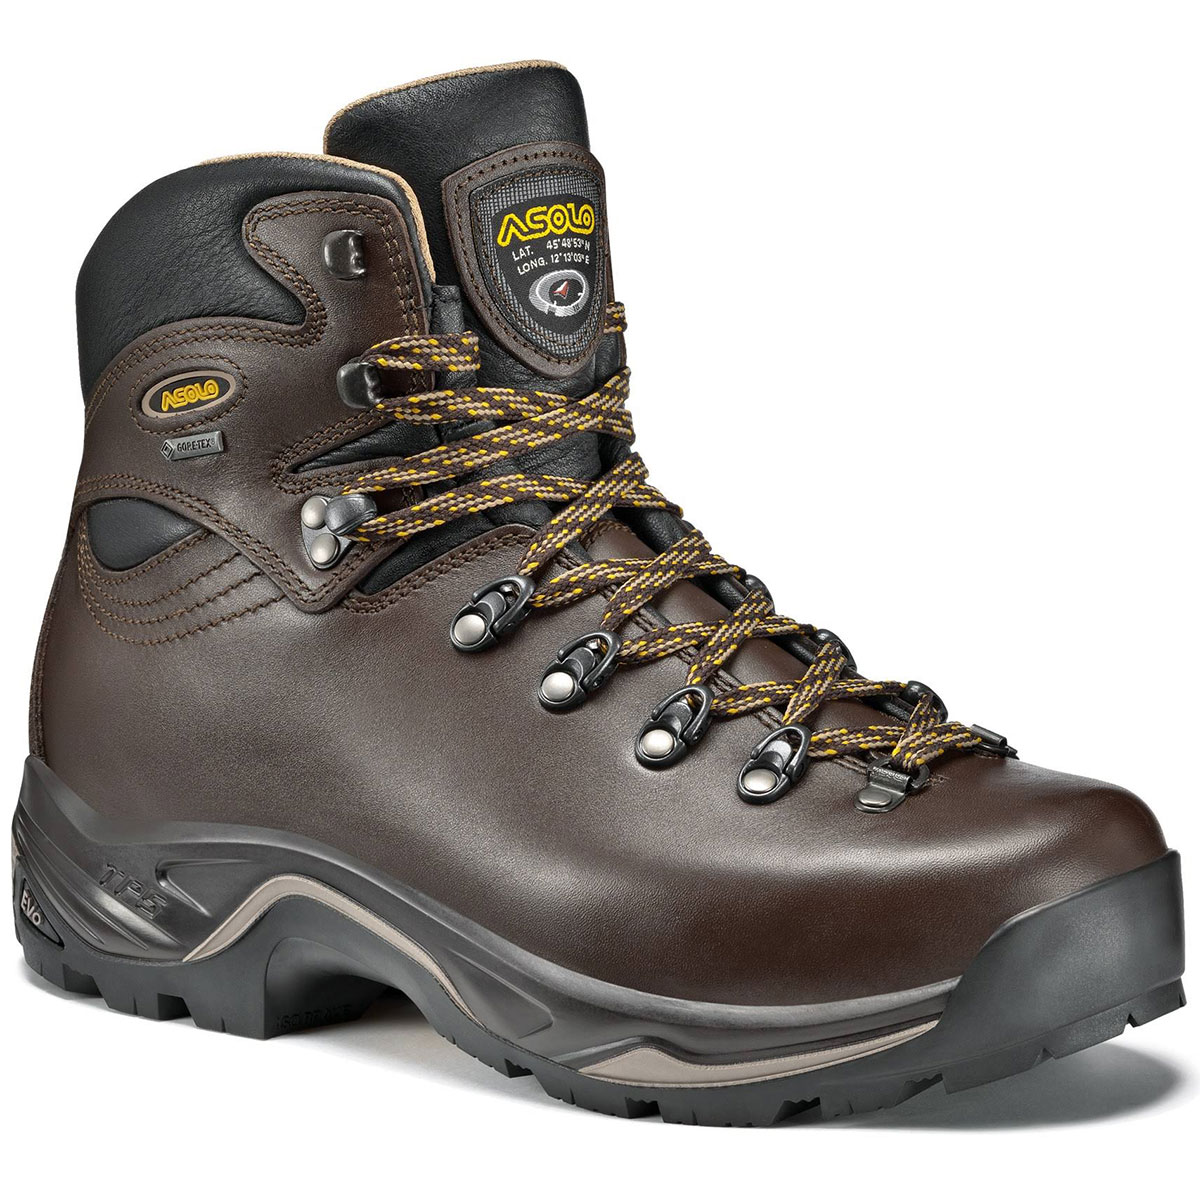 Asolo Women’s Tps 520 Gv Evo Backpacking Boots – Size 10.5